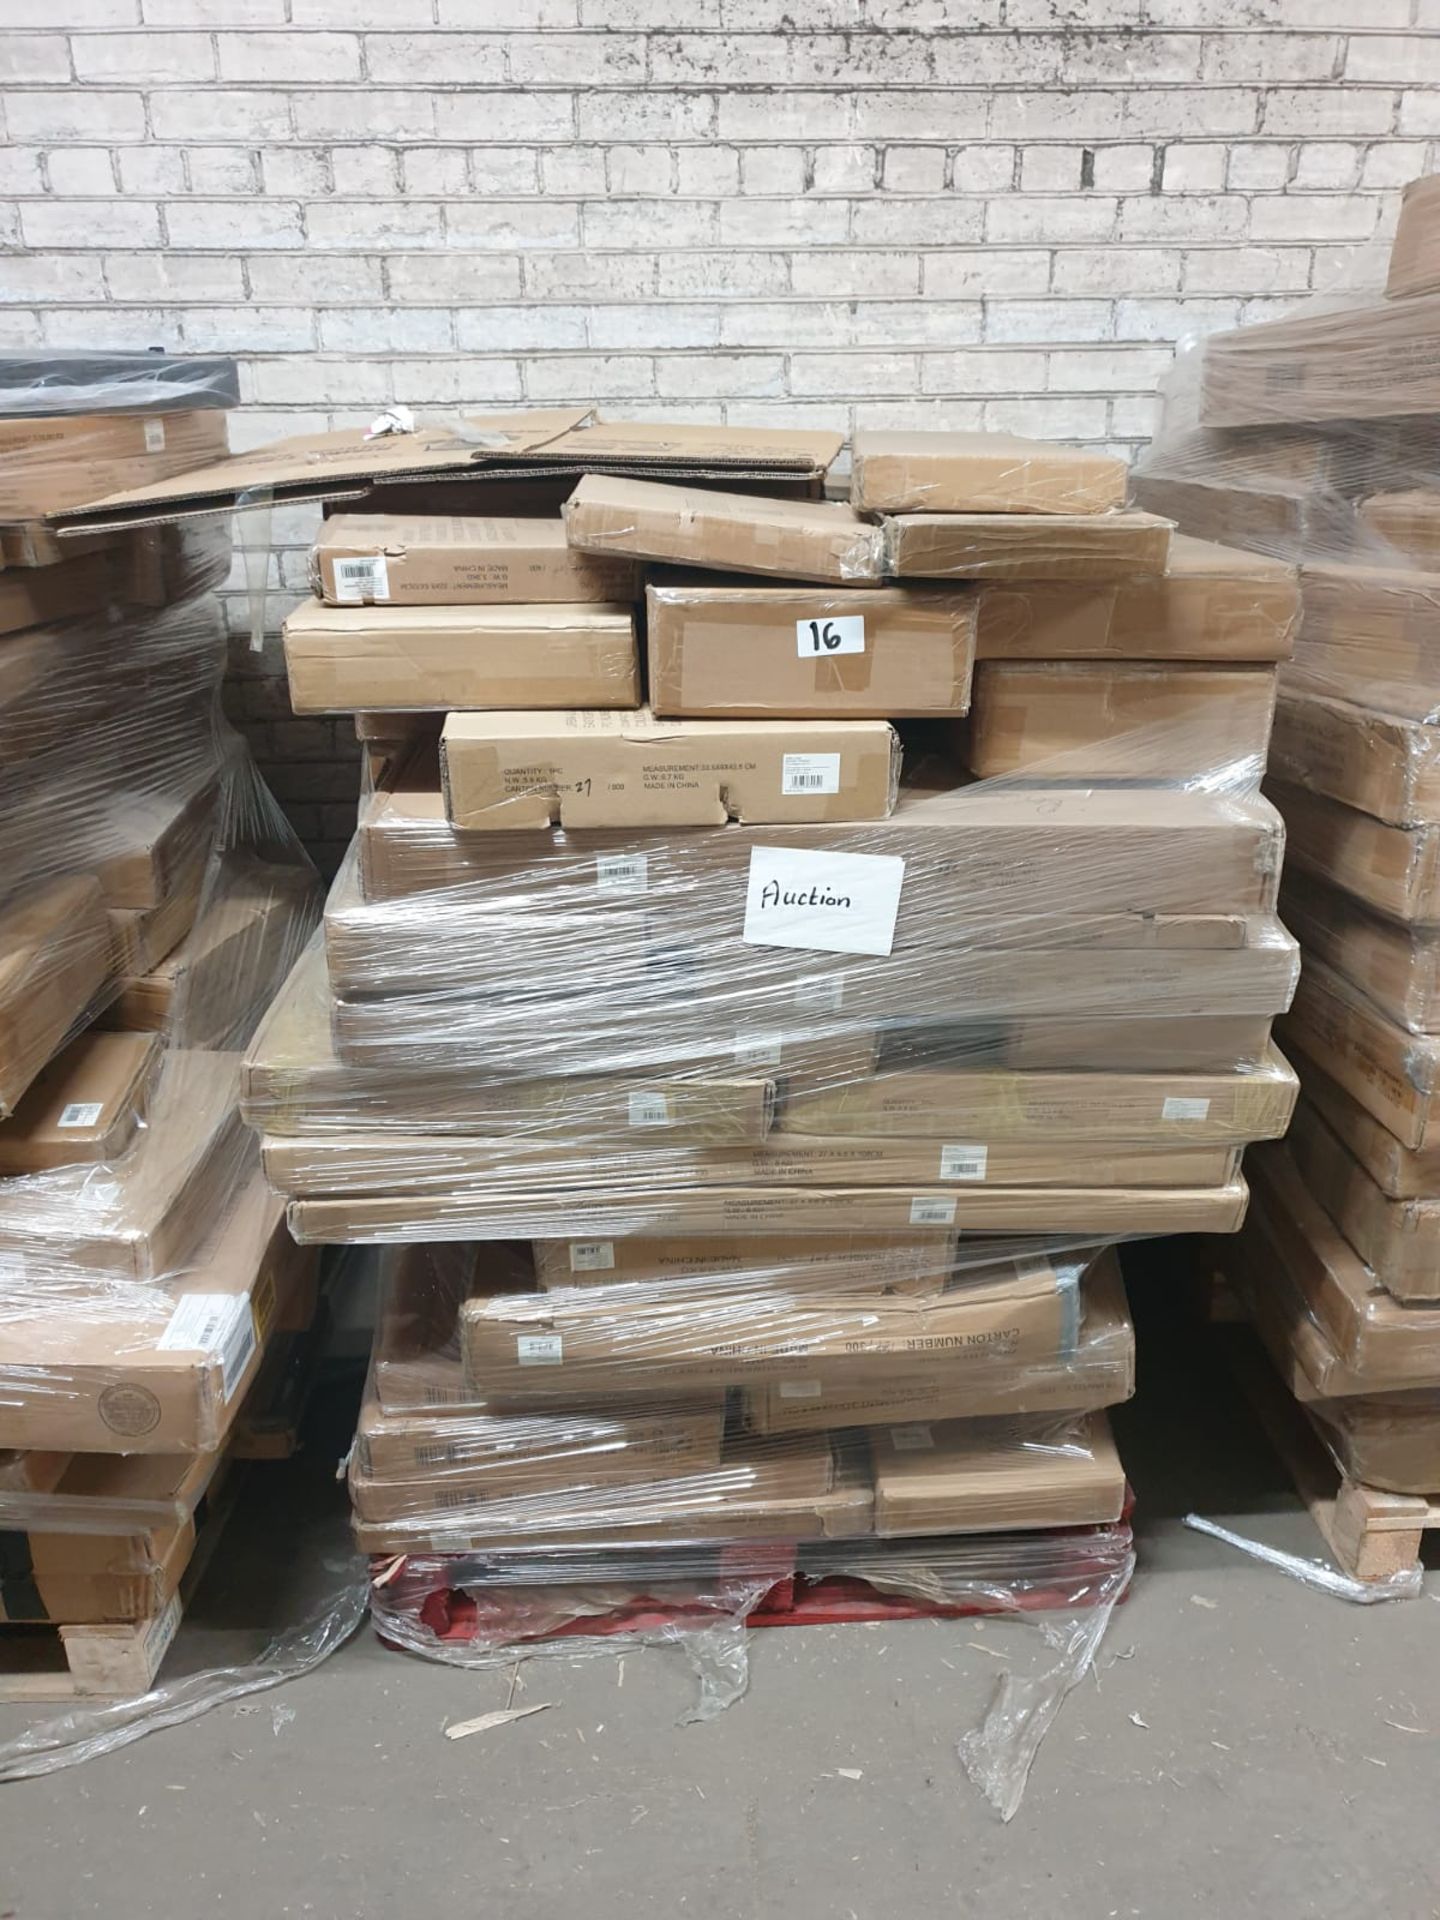 24 Pallets of Flat Packed Home Furniture from Homega | Cube Storage, Wardrobes, Sideboards & More - Image 14 of 29